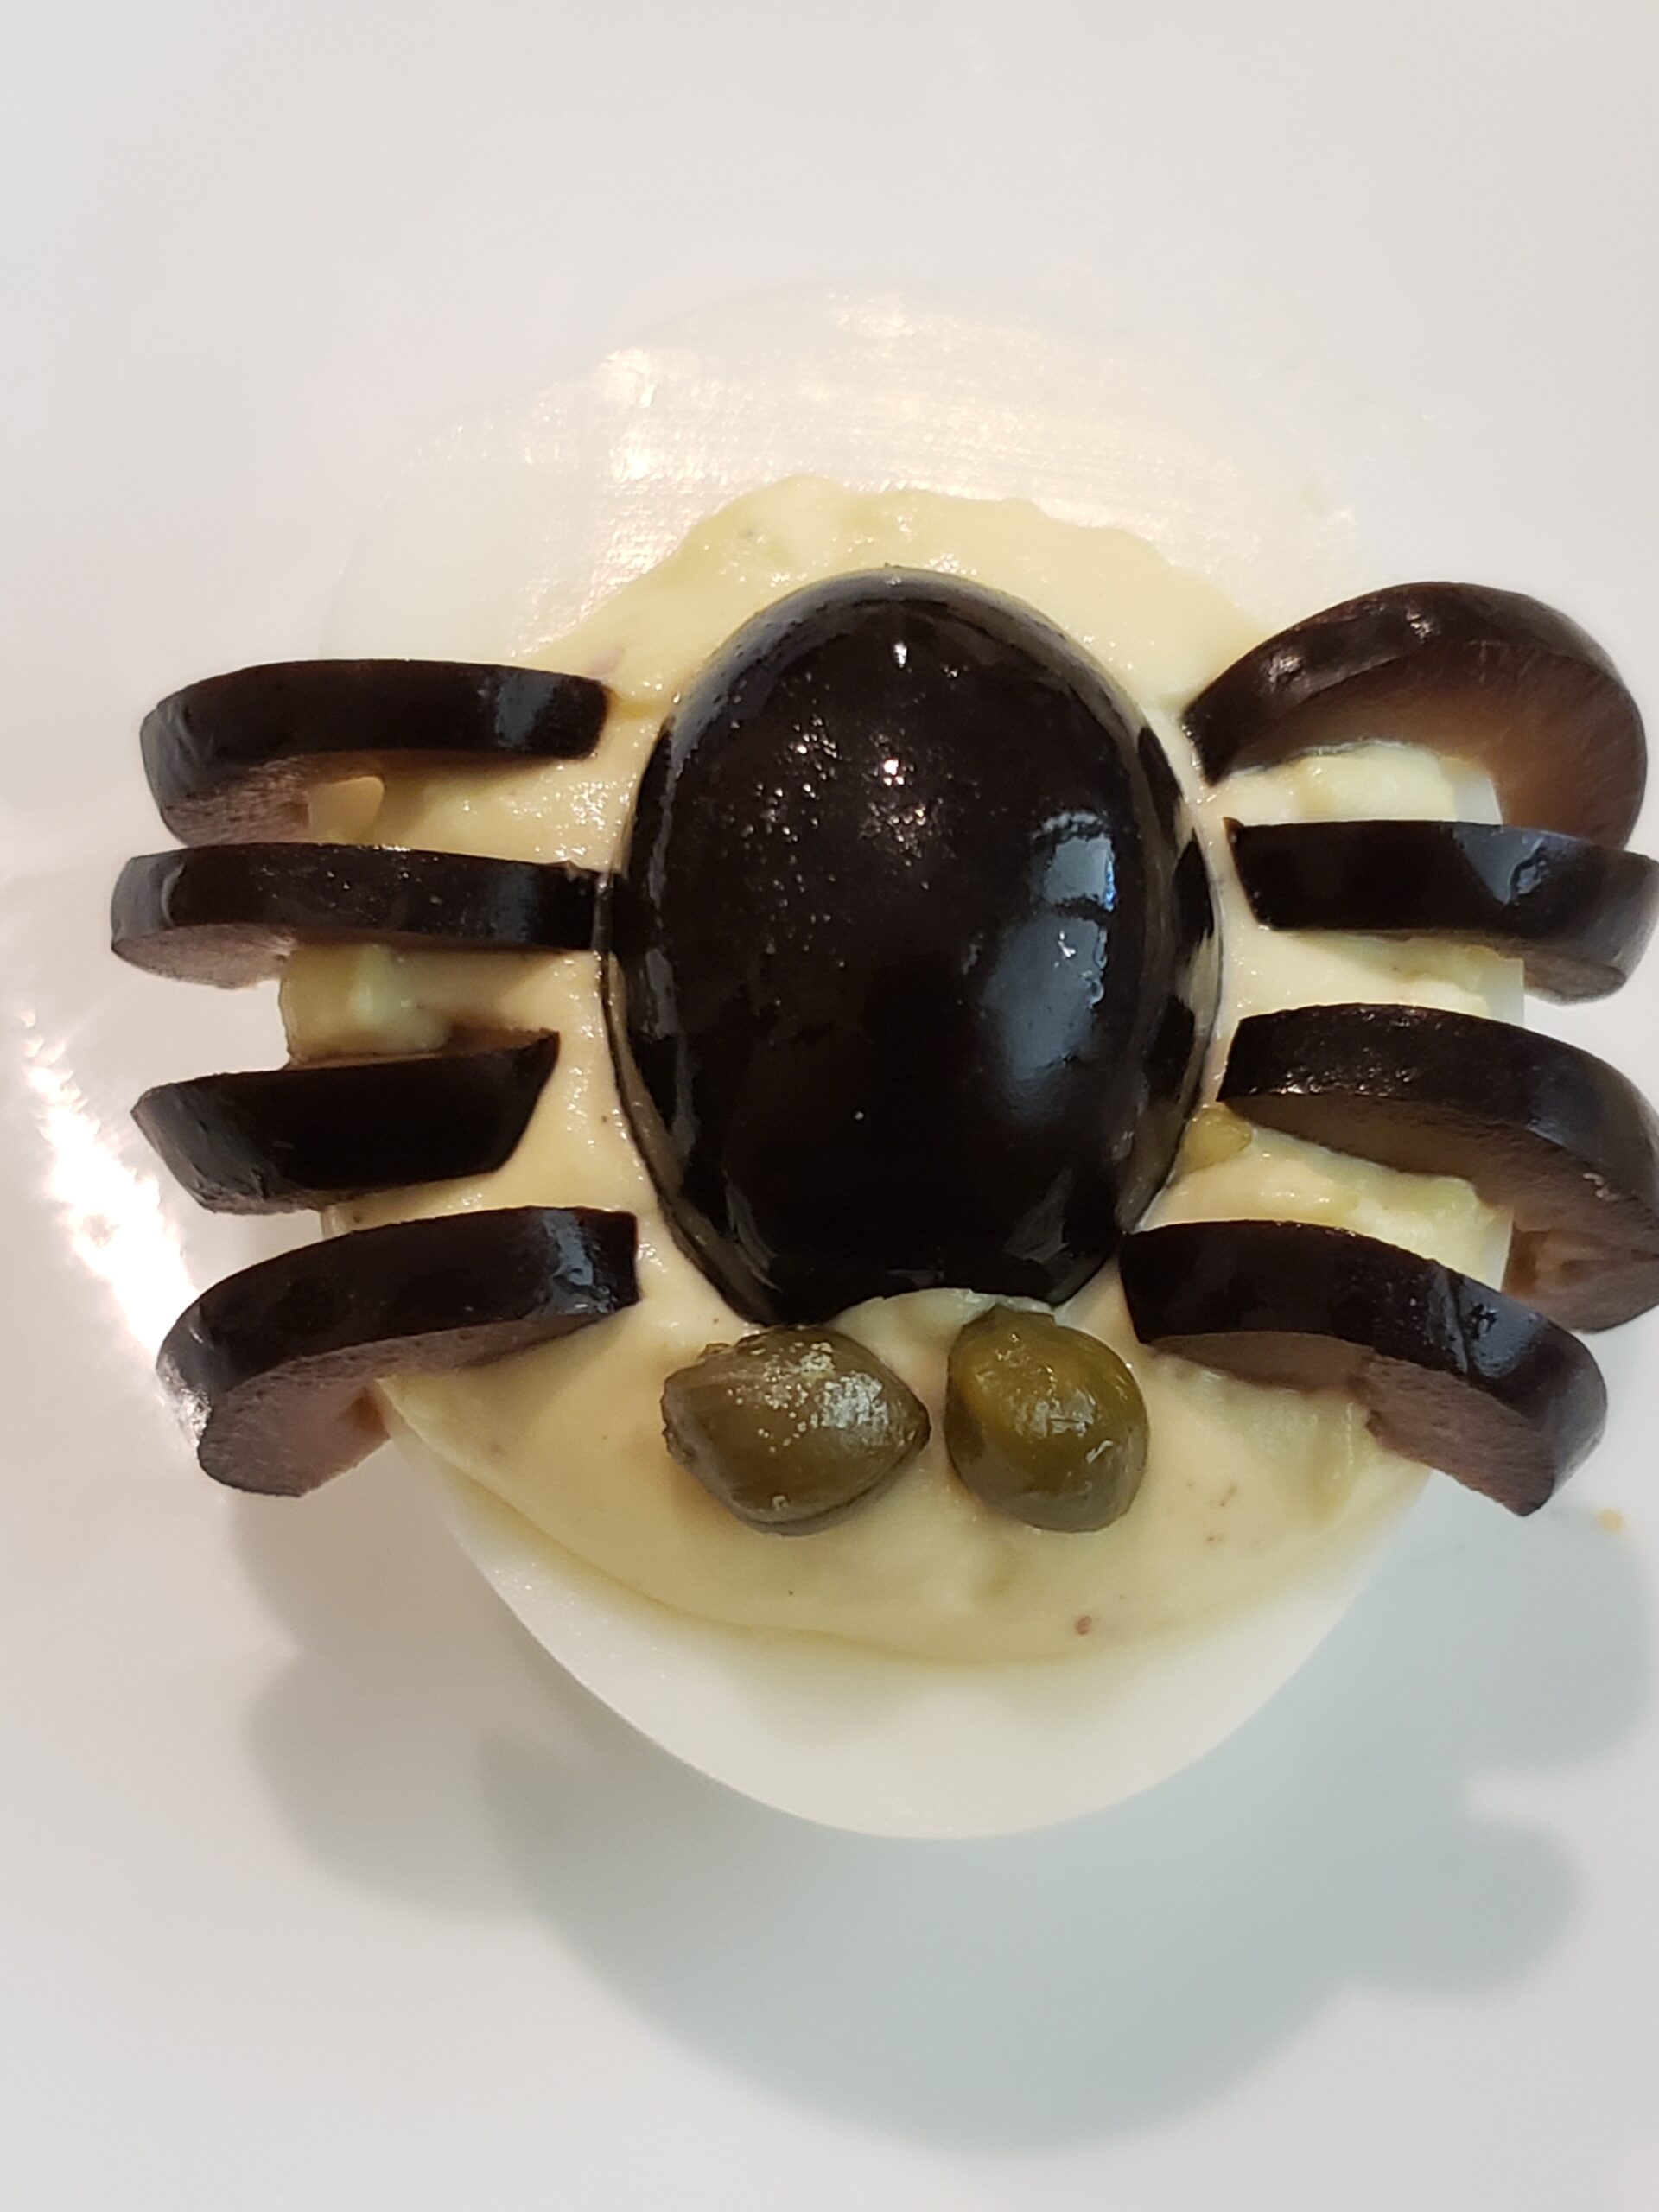 capers added to deviled egg as spider eyes.